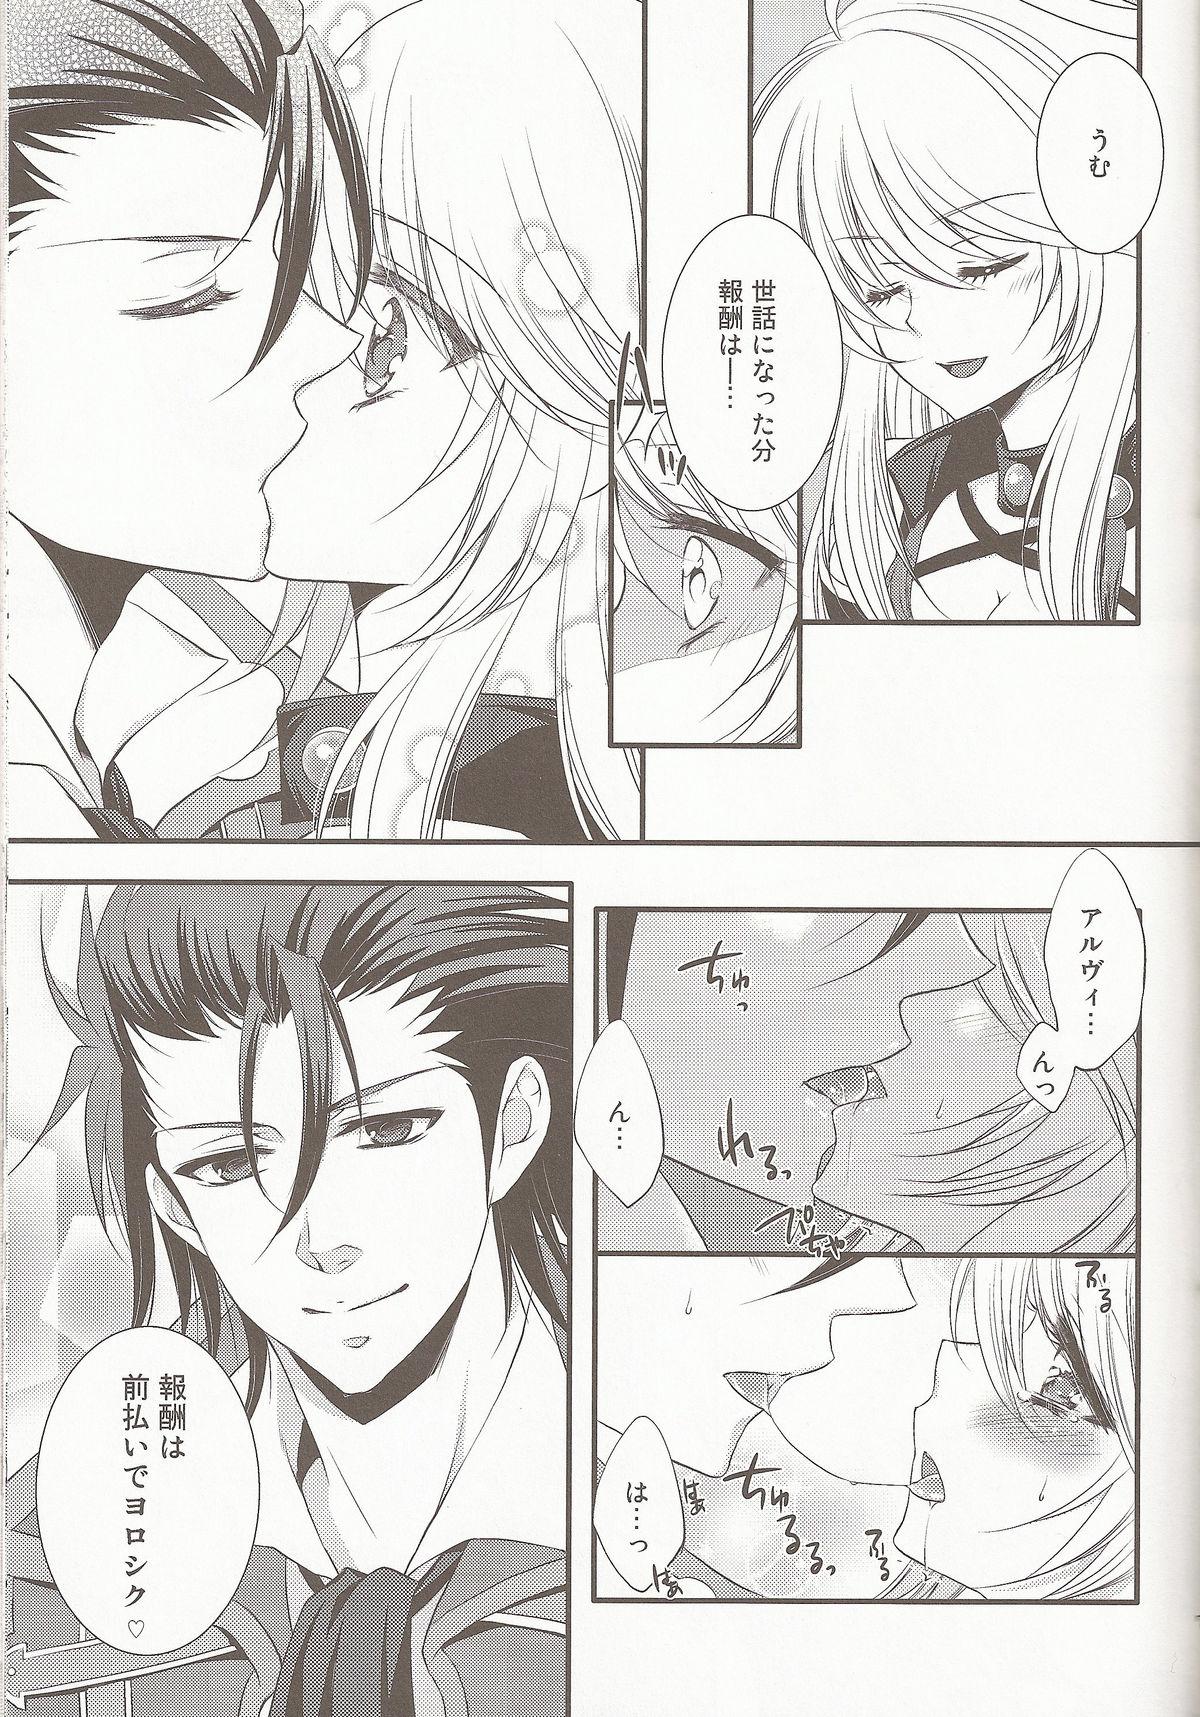 Hunk External Link - Tales of xillia People Having Sex - Page 7